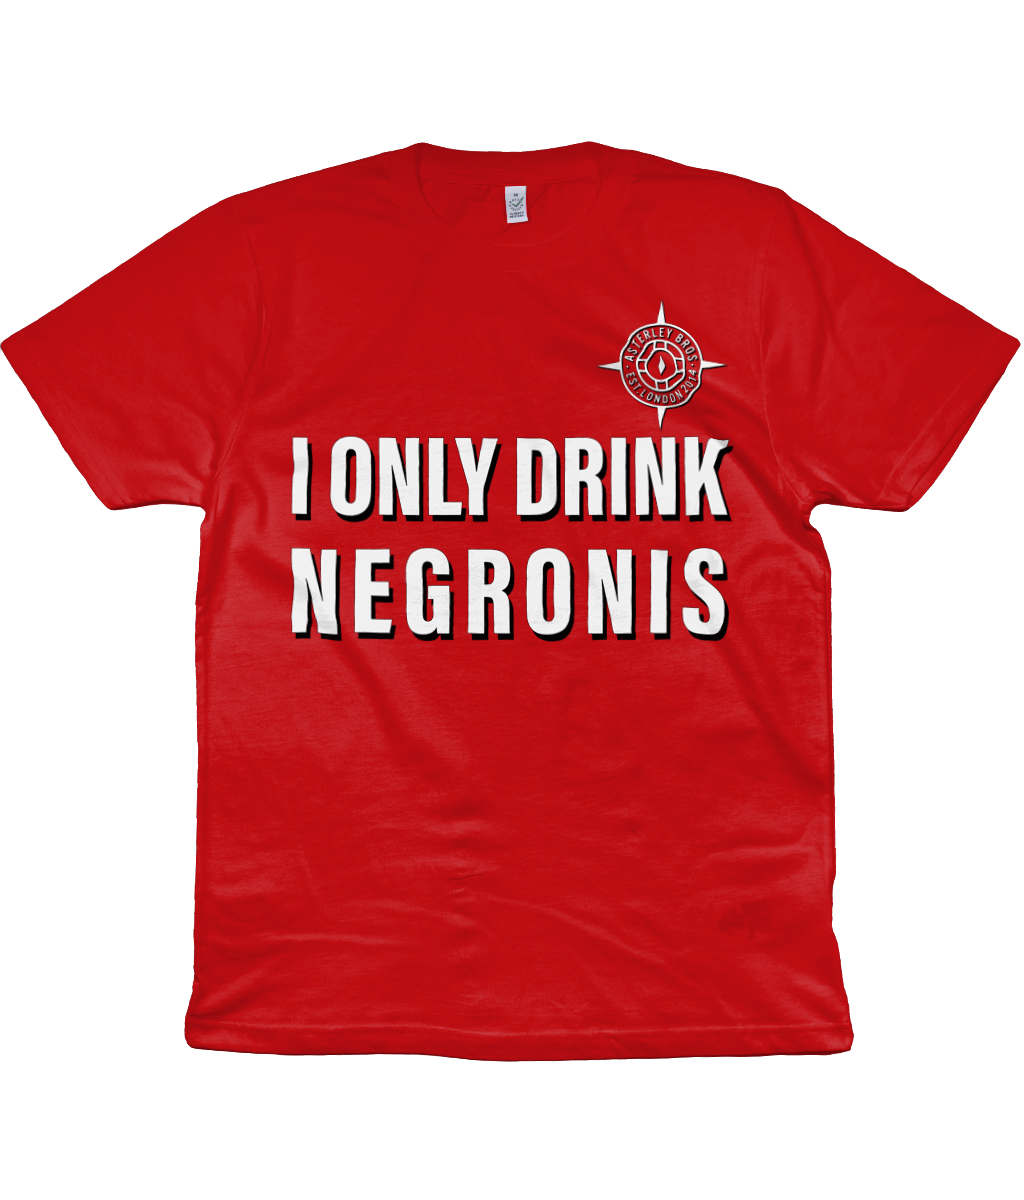 I ONLY DRINK NEGRONIS - THE SHIRT